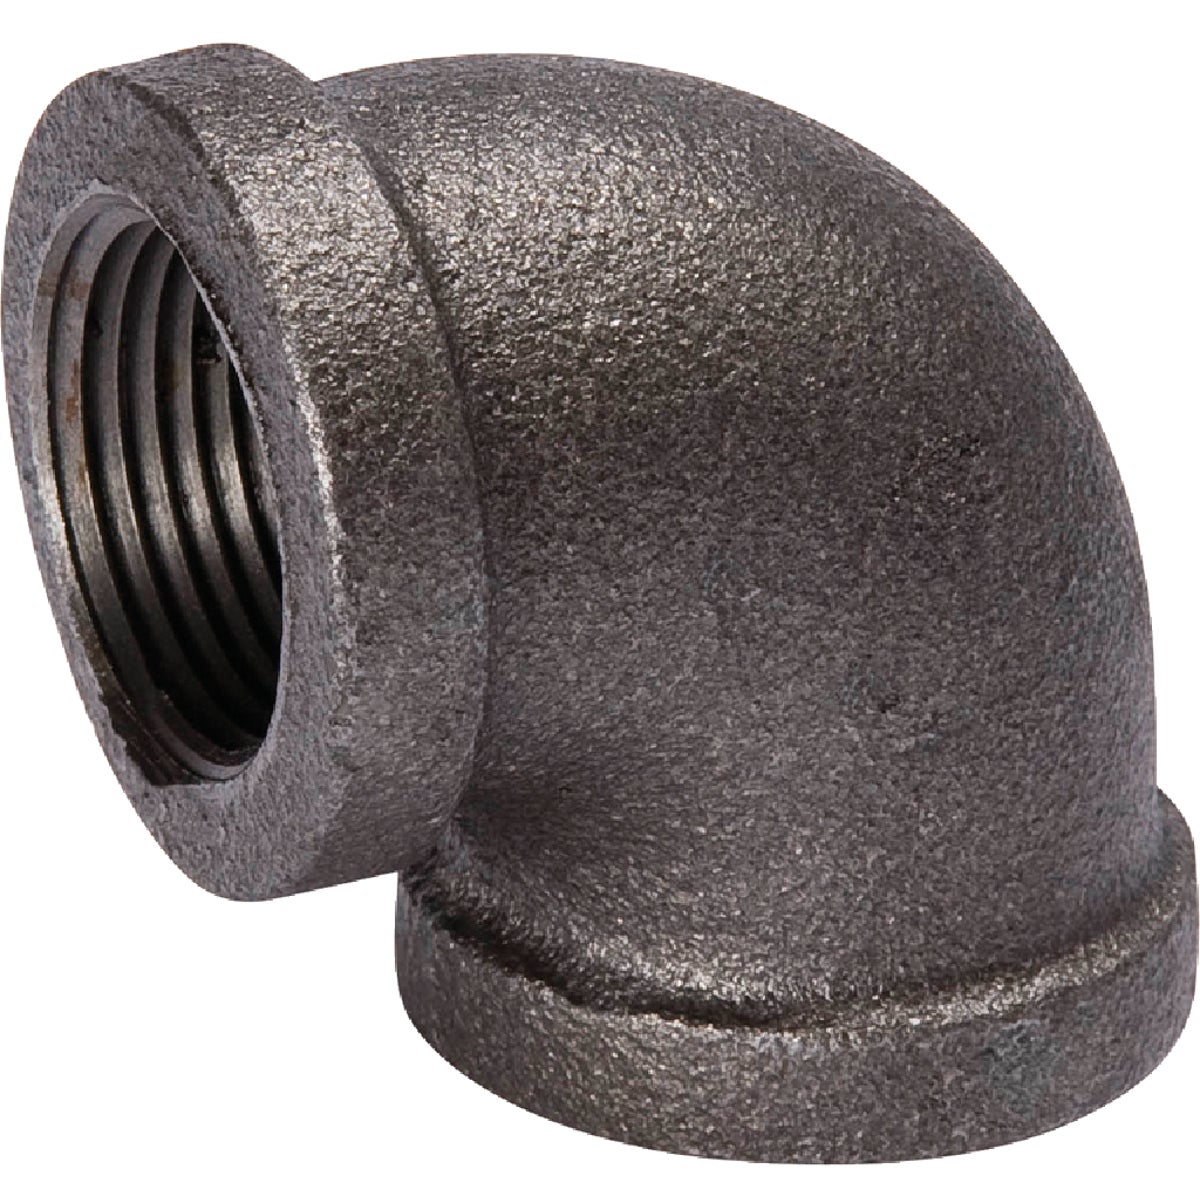 Southland 3/4 In. 90 Deg. Malleable Black Iron Elbow (1/4 Bend)